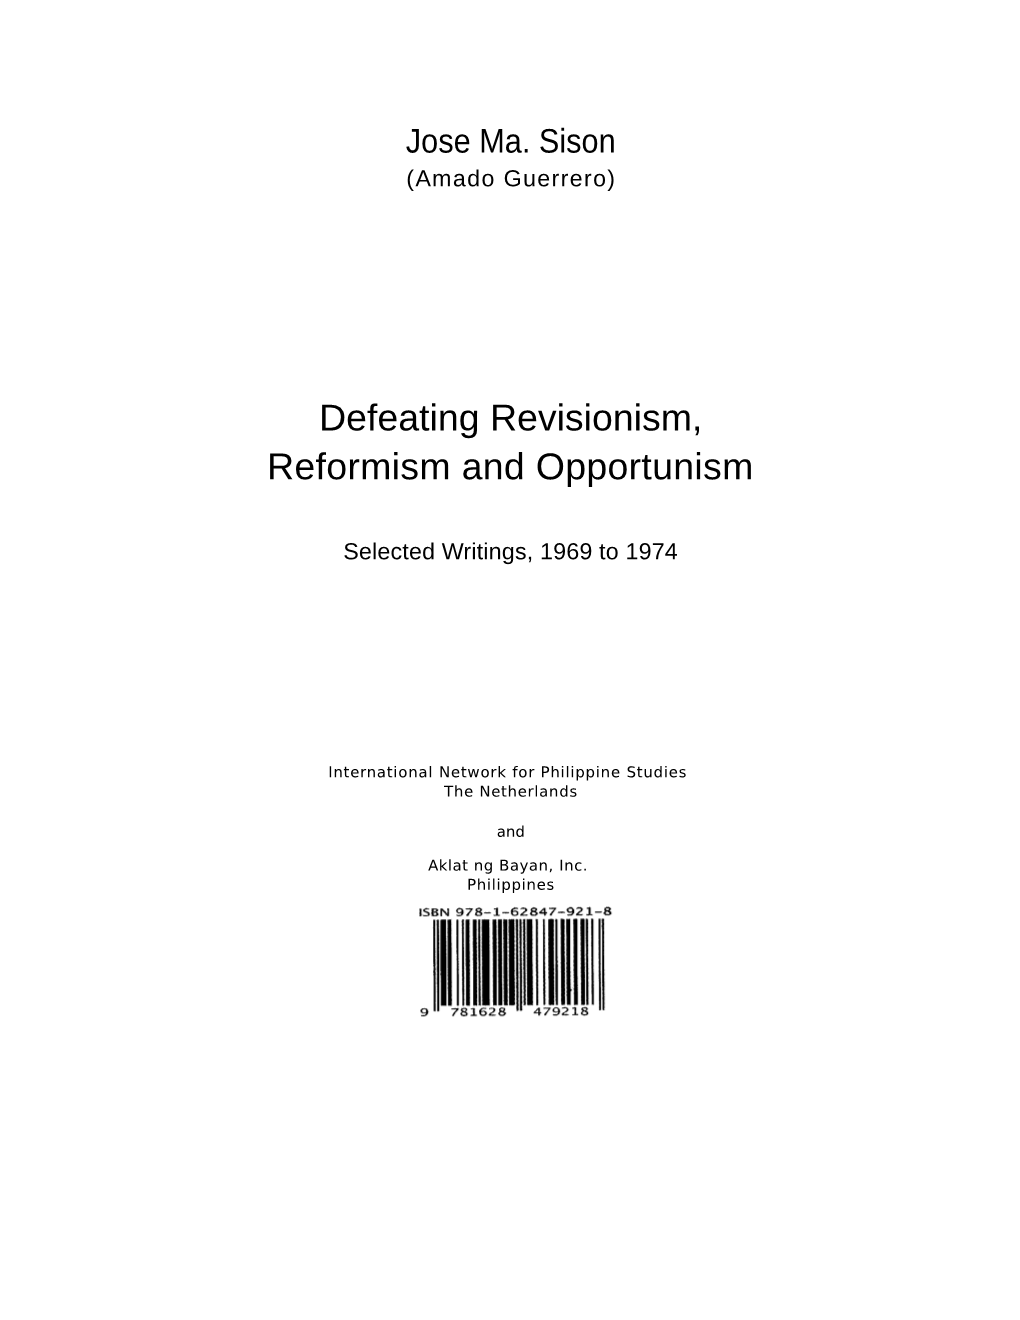 Defeating Revisionism, Reformism and Opportunism